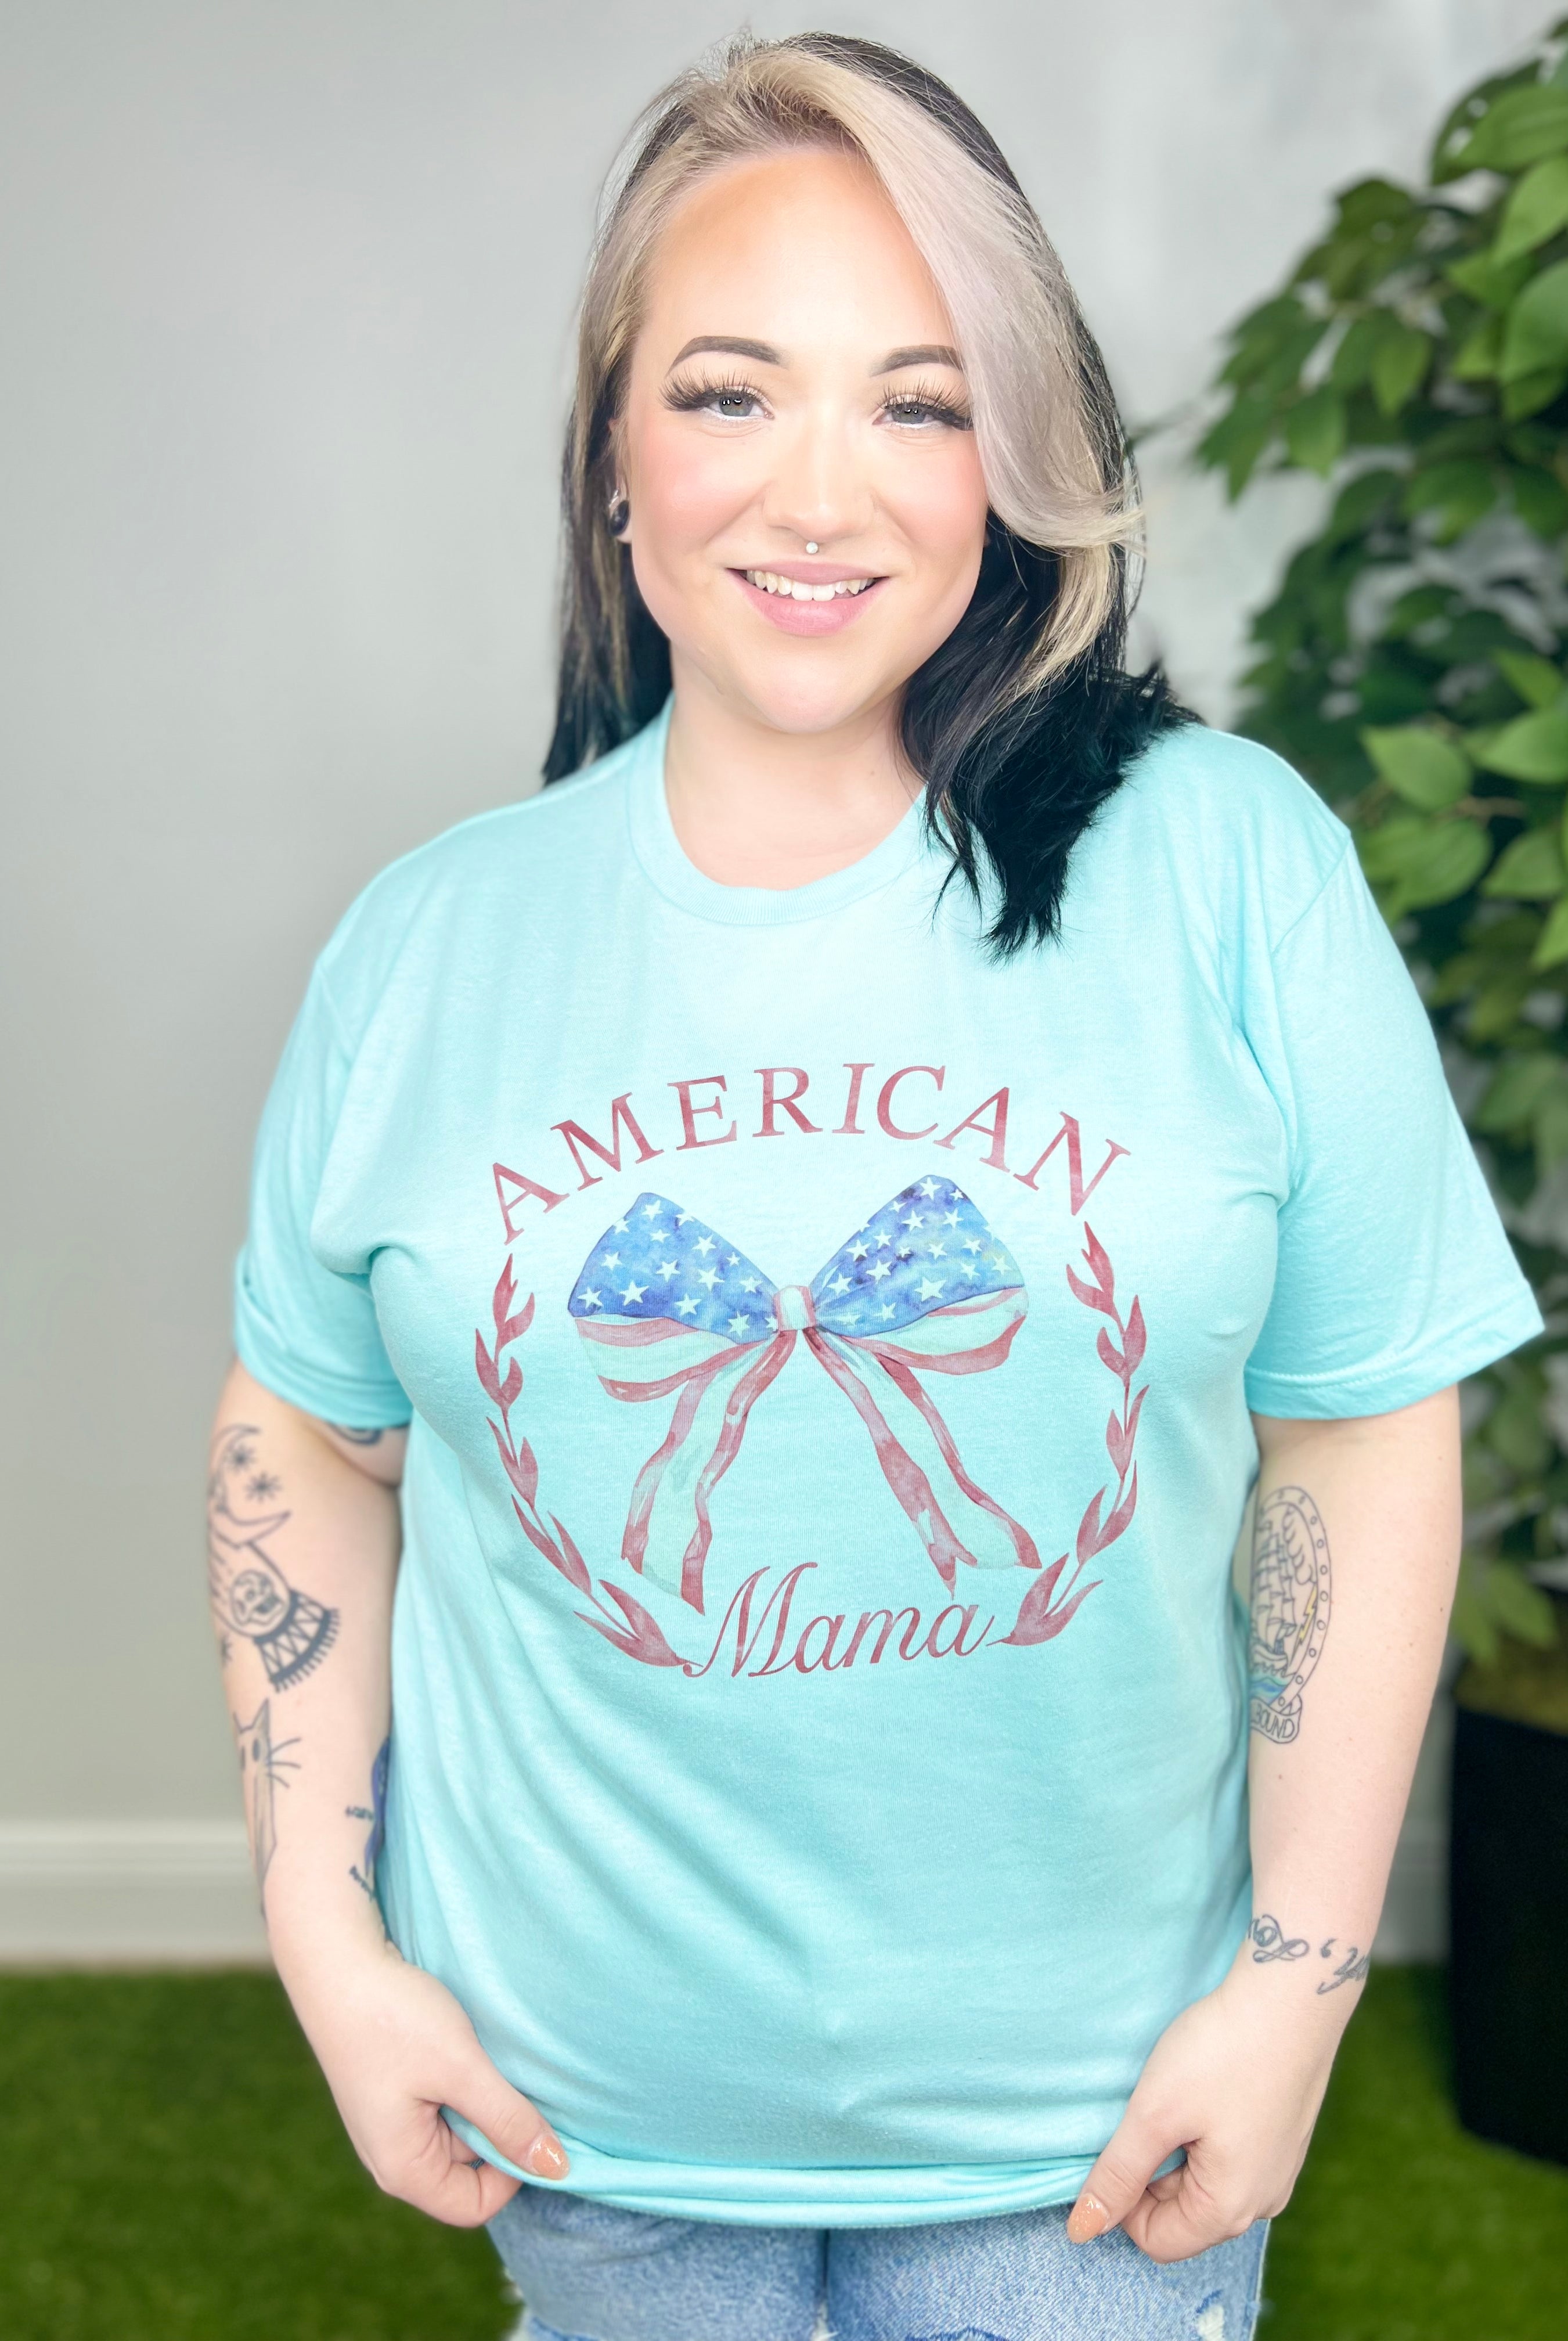 American Mama Graphic Tee-130 Graphic Tees-Heathered Boho-Heathered Boho Boutique, Women's Fashion and Accessories in Palmetto, FL